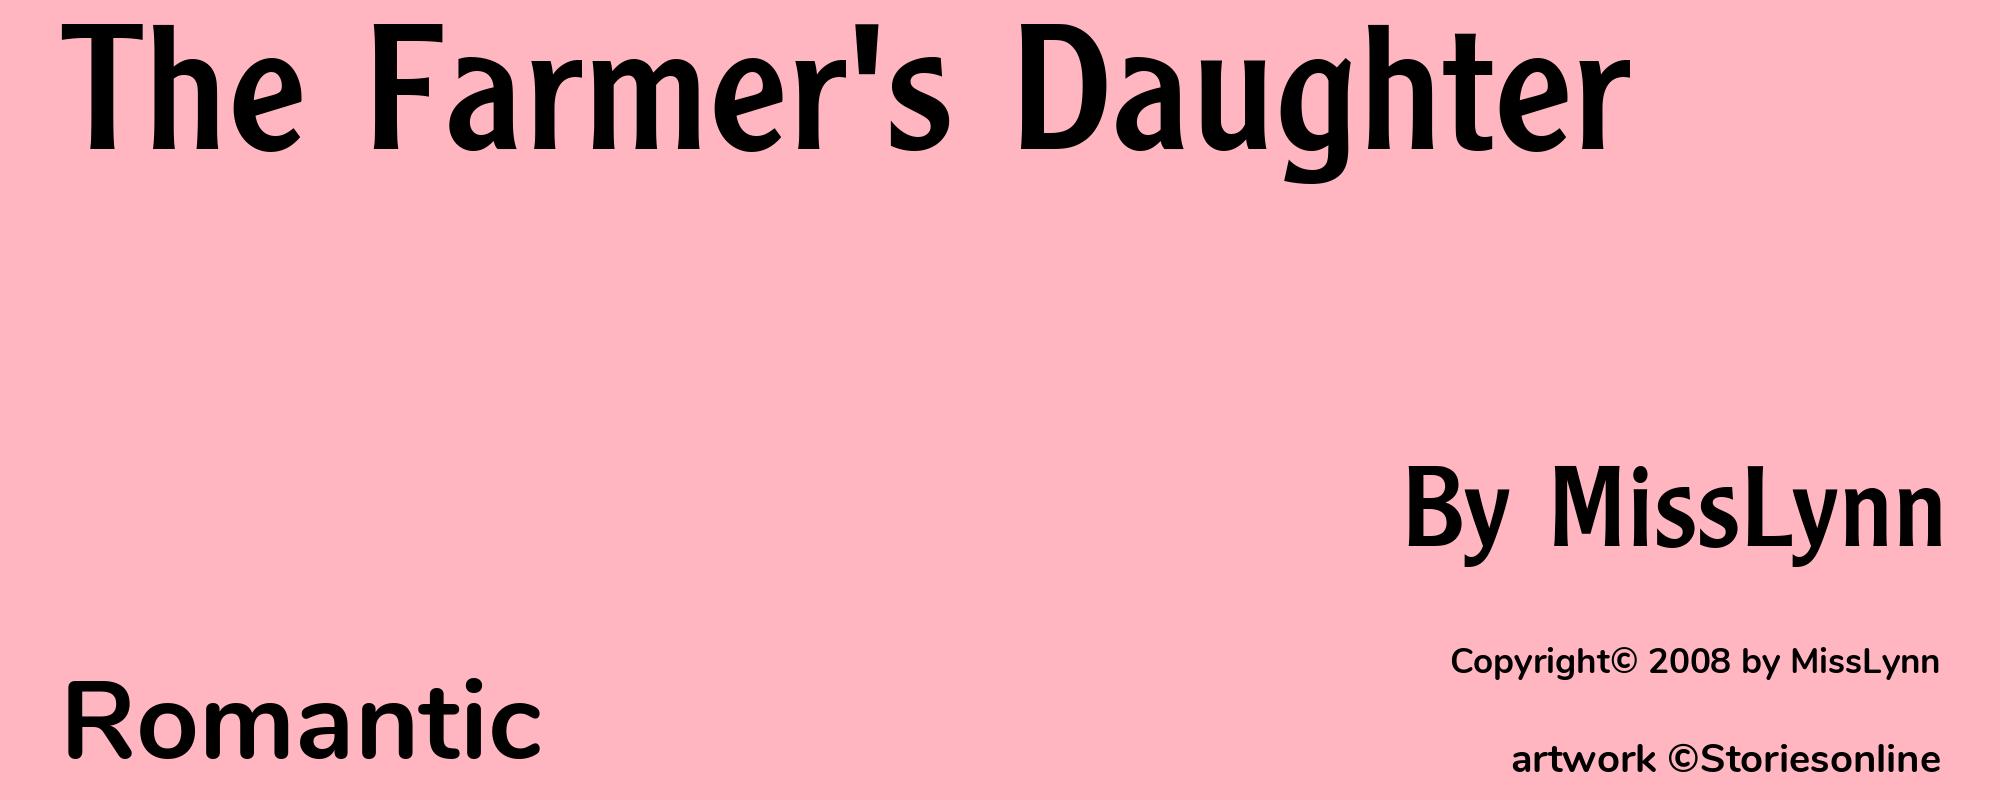 The Farmer's Daughter - Cover